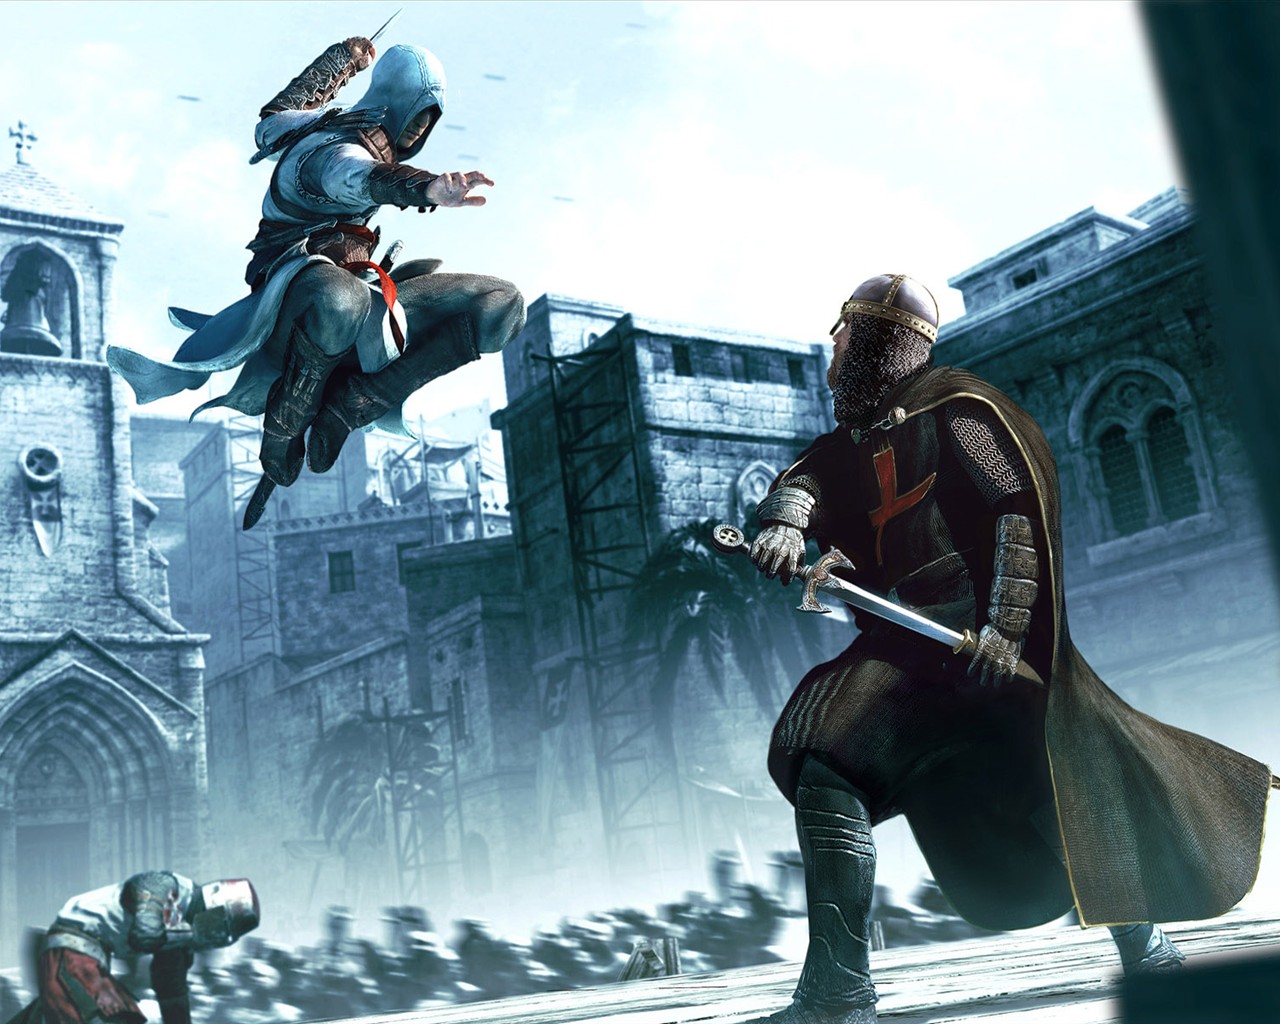 Assassin's Creed HD game wallpaper #2 - 1280x1024